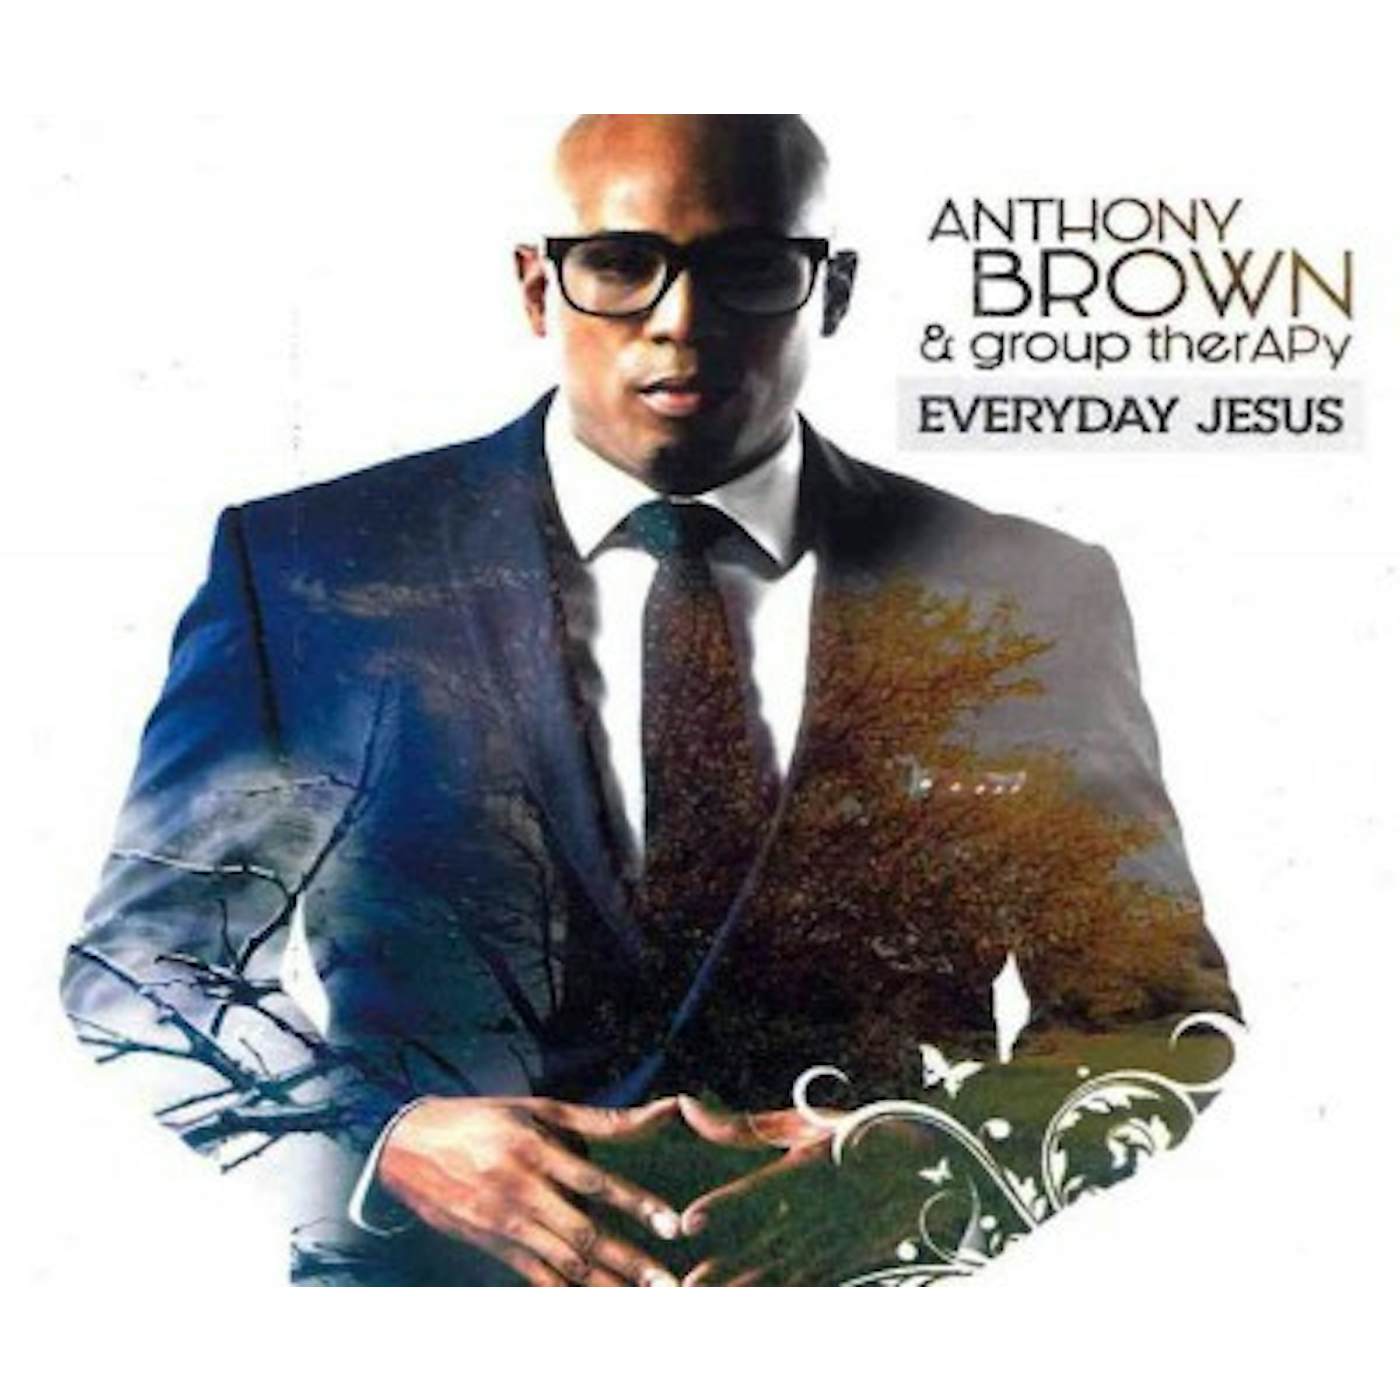 Anthony Brown & group therAPy Everyday Jesus CD